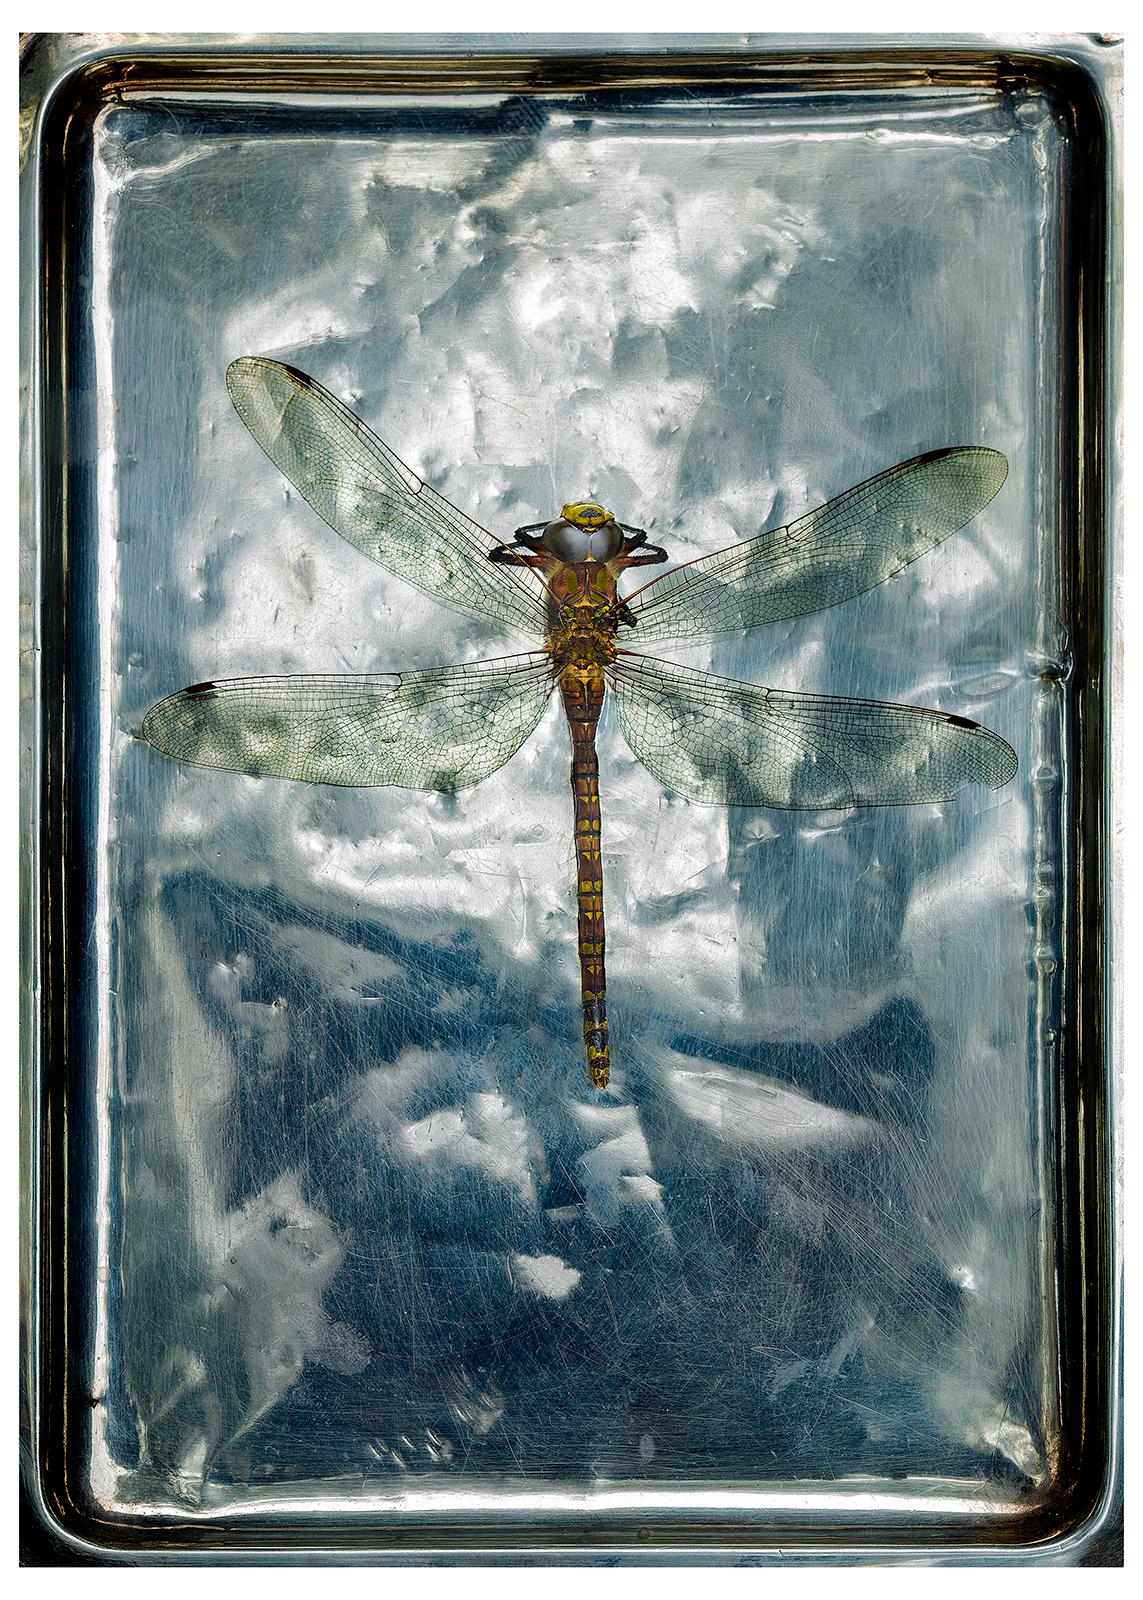 Dragonfly - Signed limited edition fine art print, colour photography, Oversize